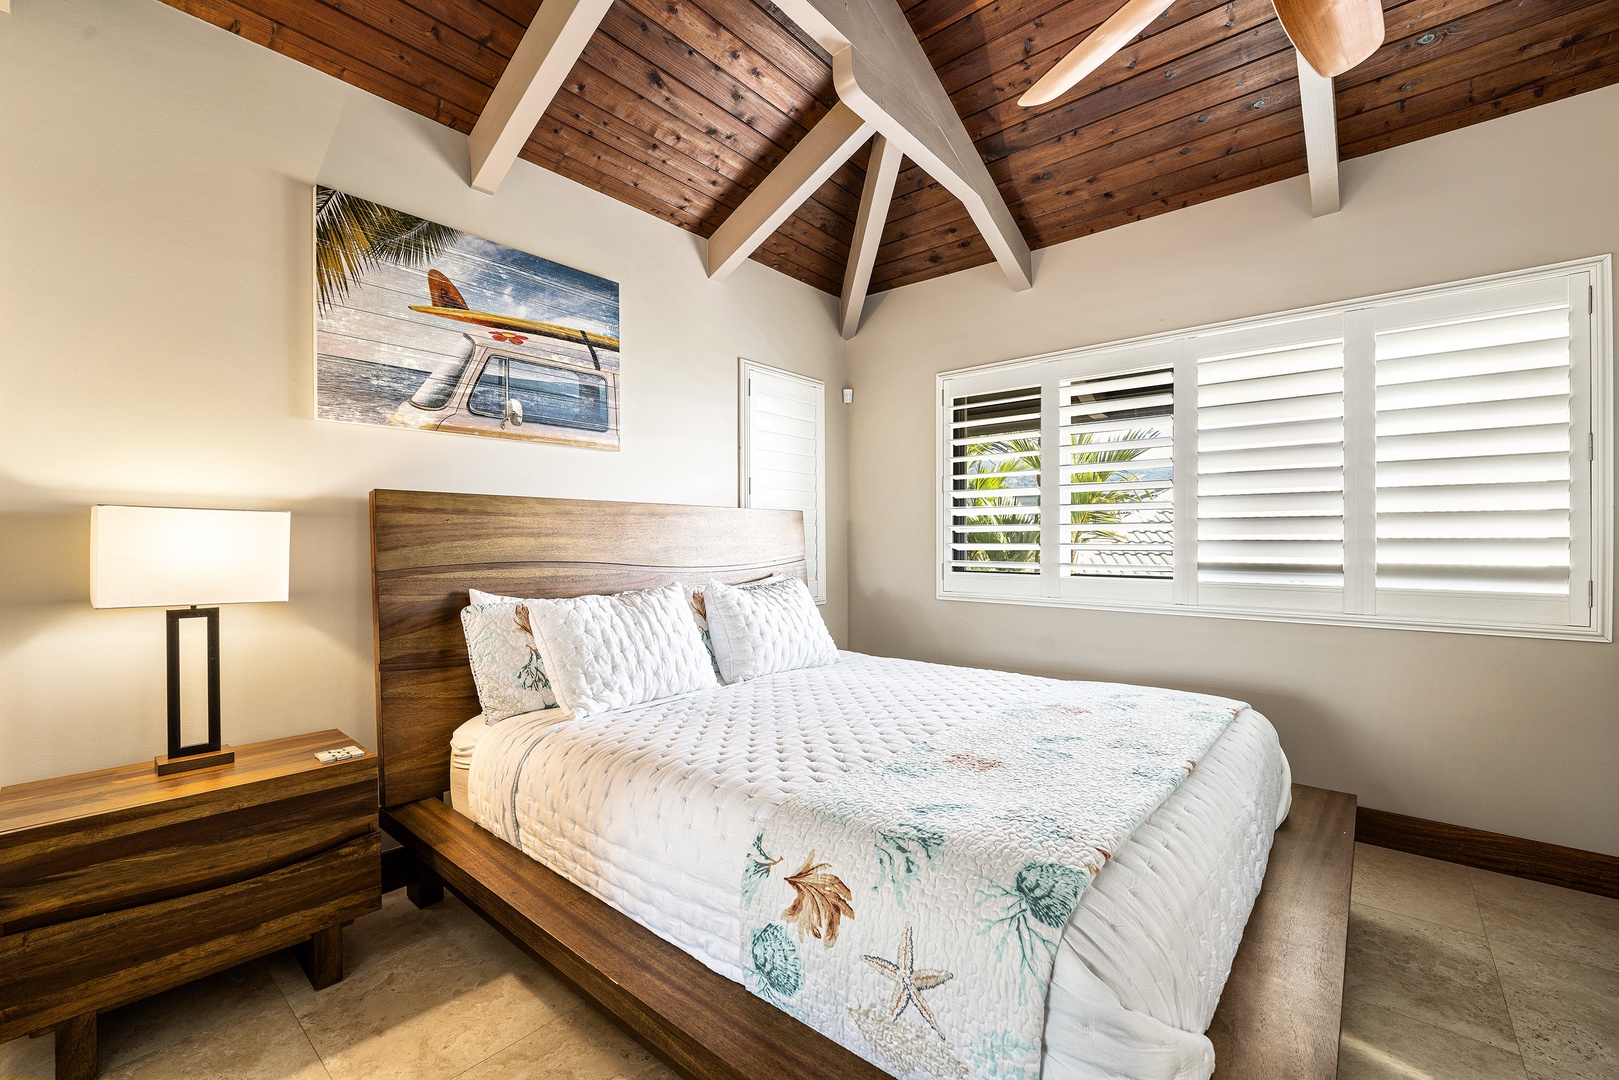 Kailua Kona Vacation Rentals, Ali'i Point #9 - Guest bedroom with Queen bed, A/C, TV, and Mountain views